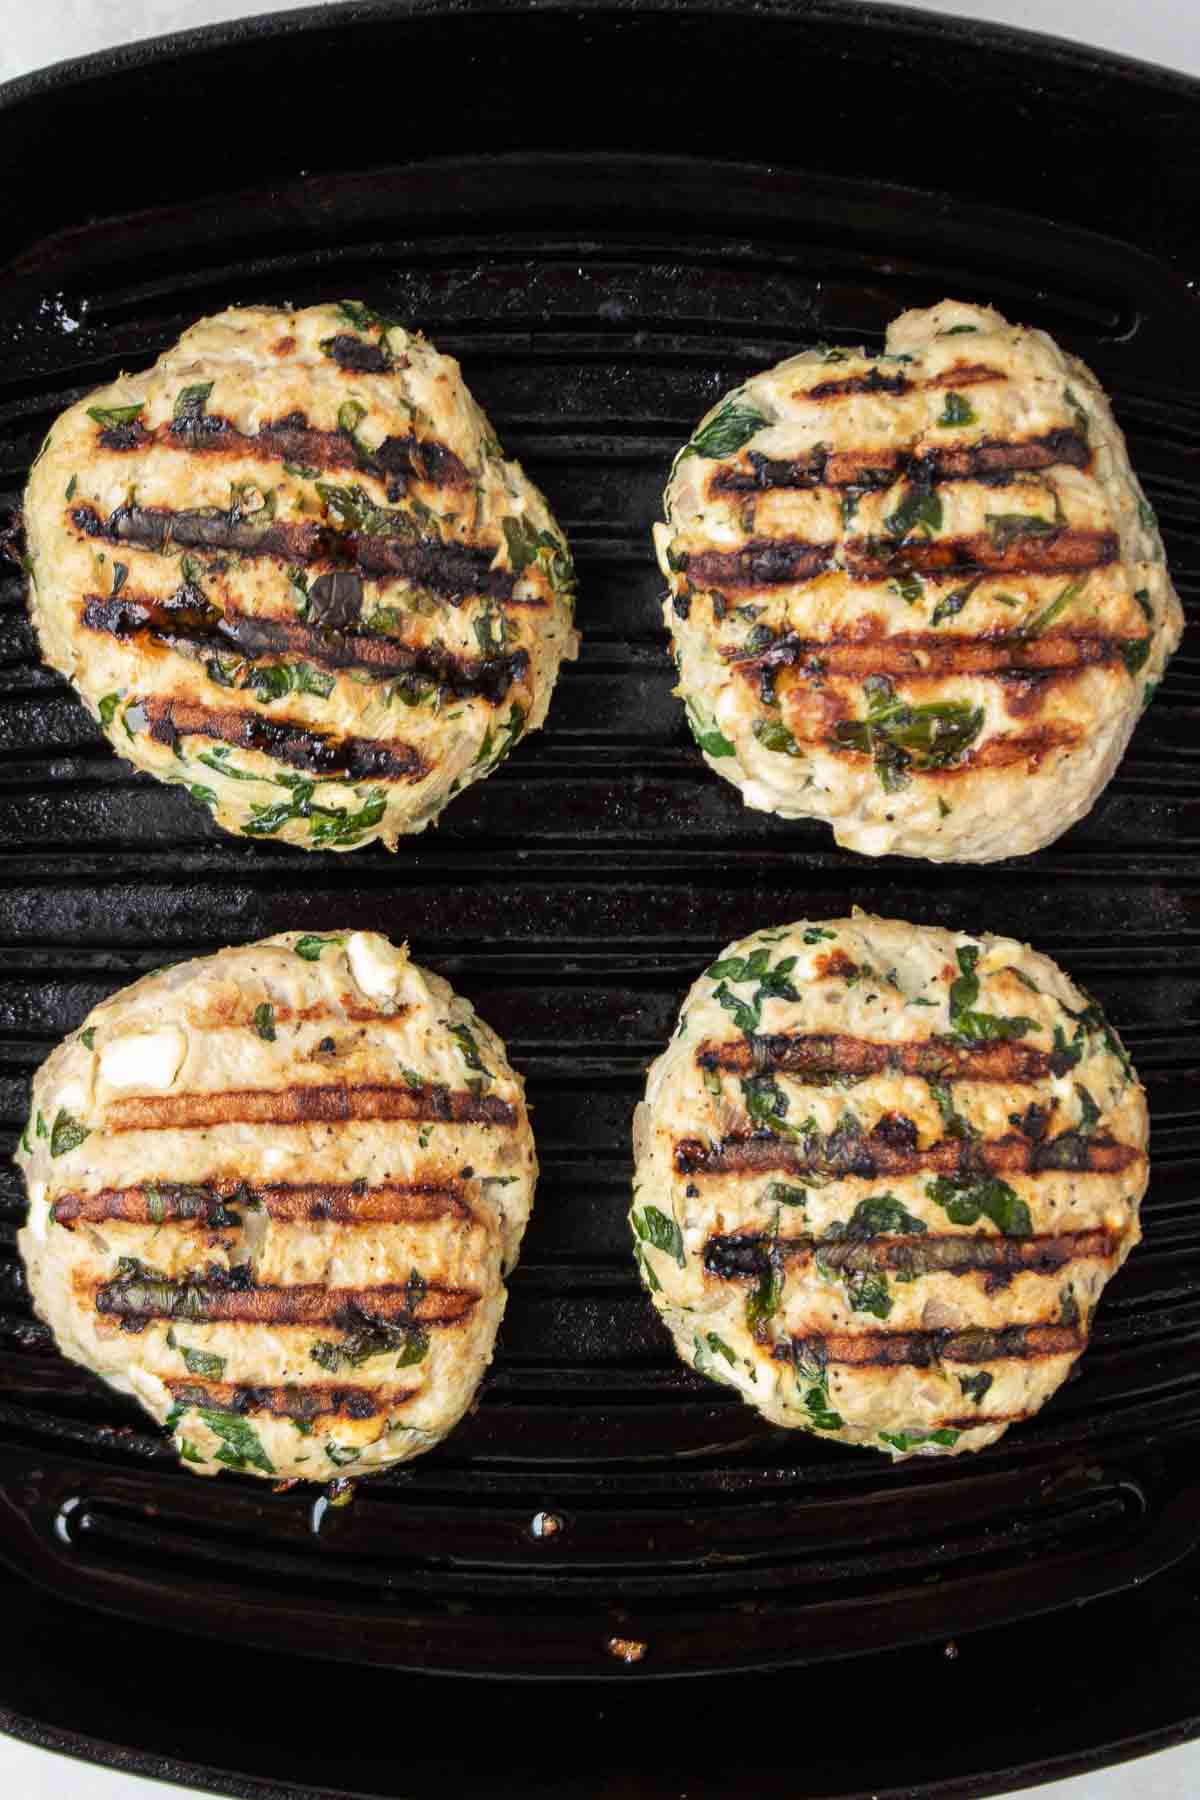 Spinach feta turkey burger patties cooking in a cast iron grill pan.